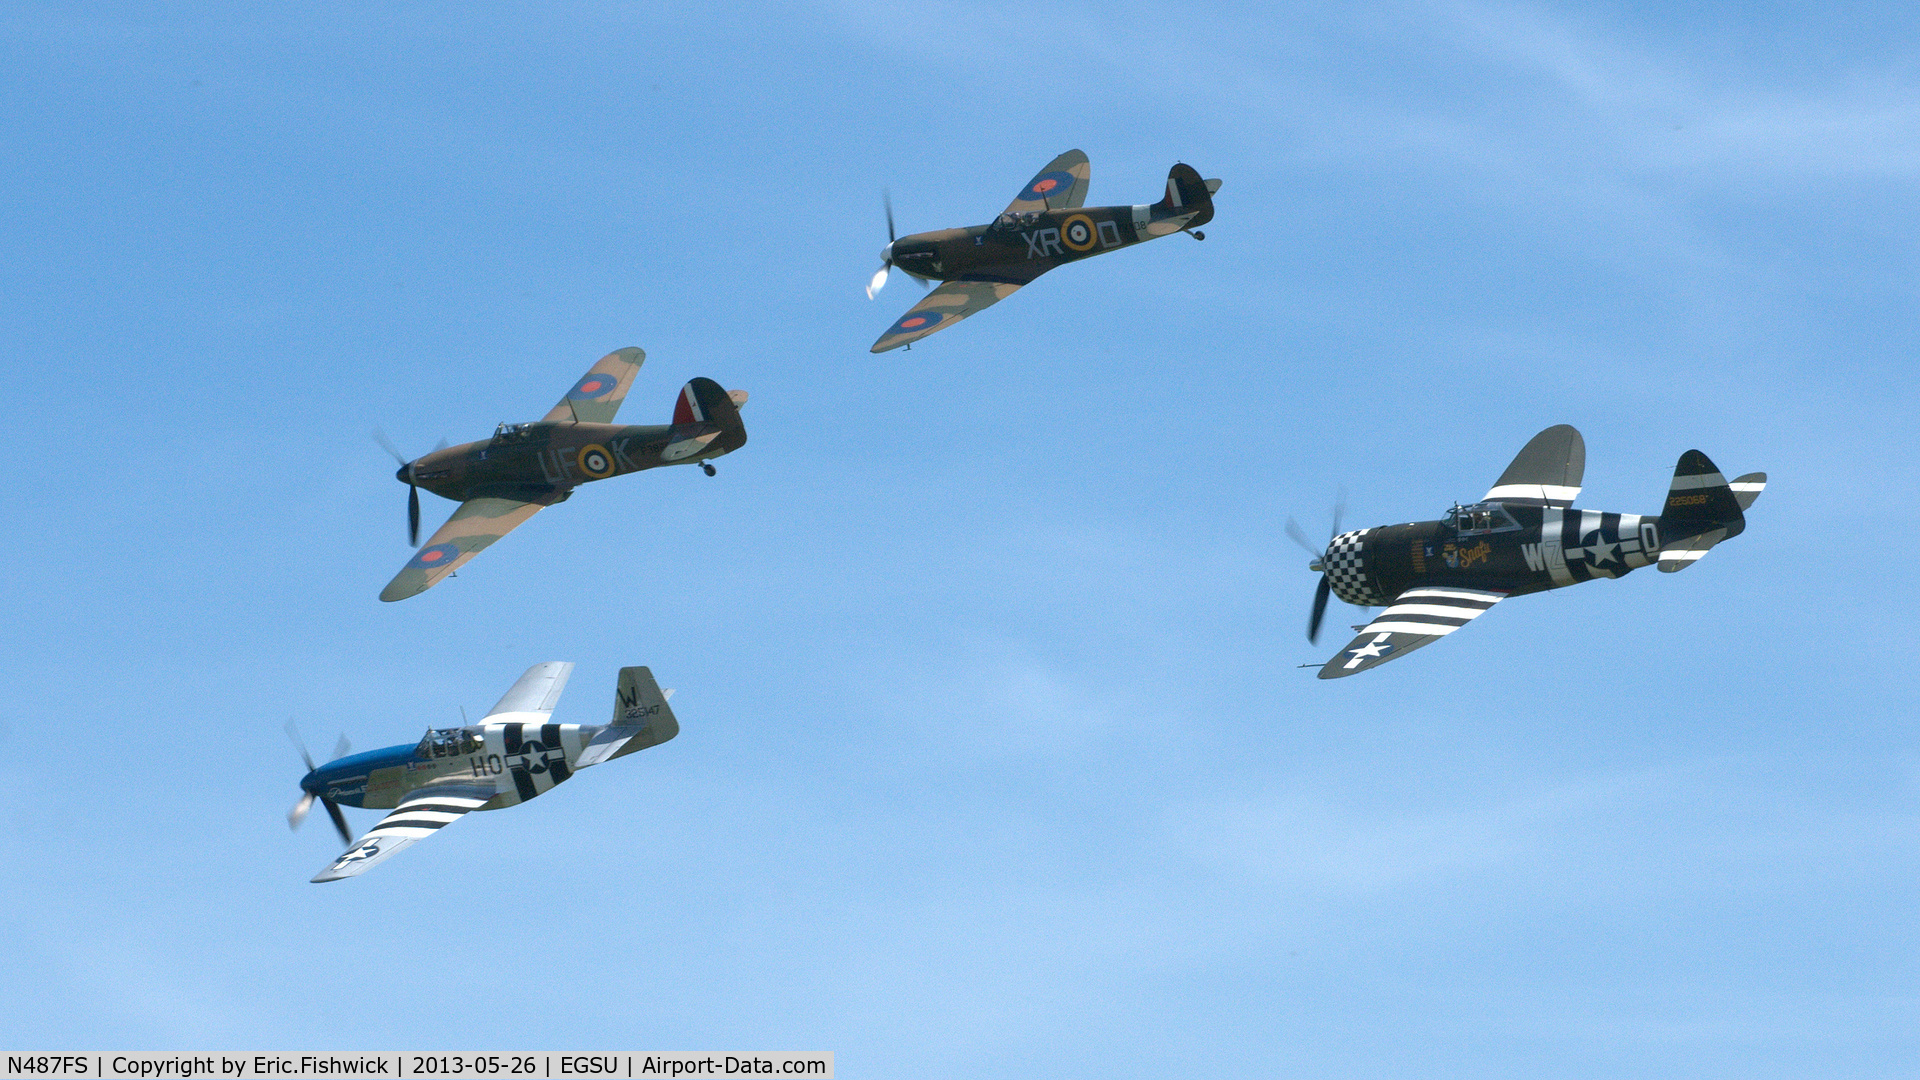 N487FS, 1943 North American P-51C Mustang C/N 103-26778, 45. 'Princess Elizabeth' with the other members of 'Eagle Squadron' at the IWM Spring Airshow, May 2013.